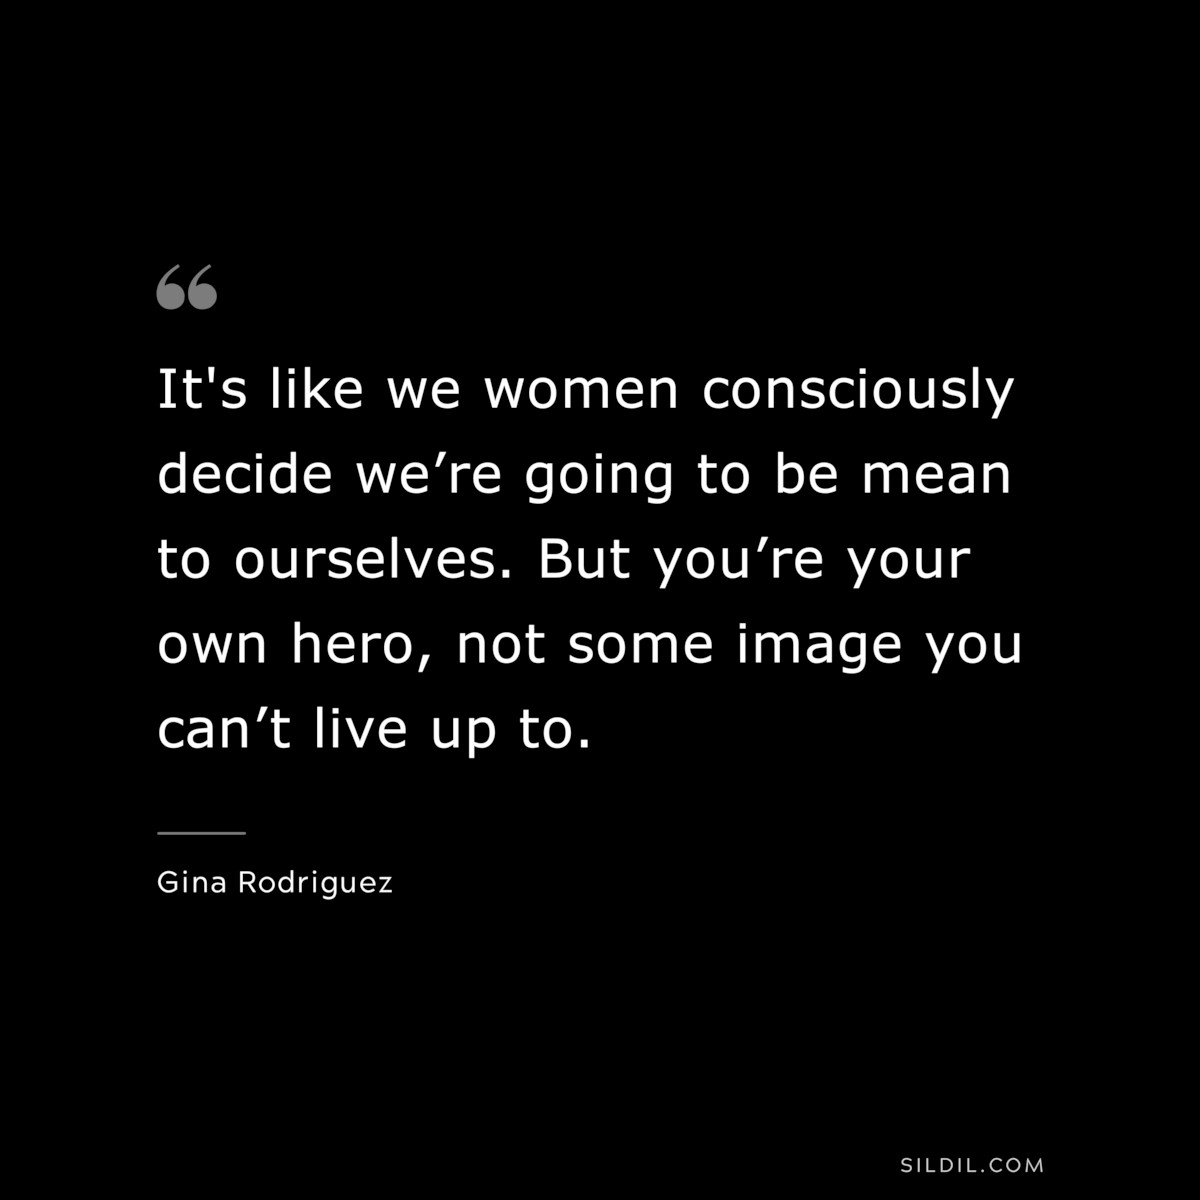 It's like we women consciously decide we’re going to be mean to ourselves. But you’re your own hero, not some image you can’t live up to. ― Gina Rodriguez